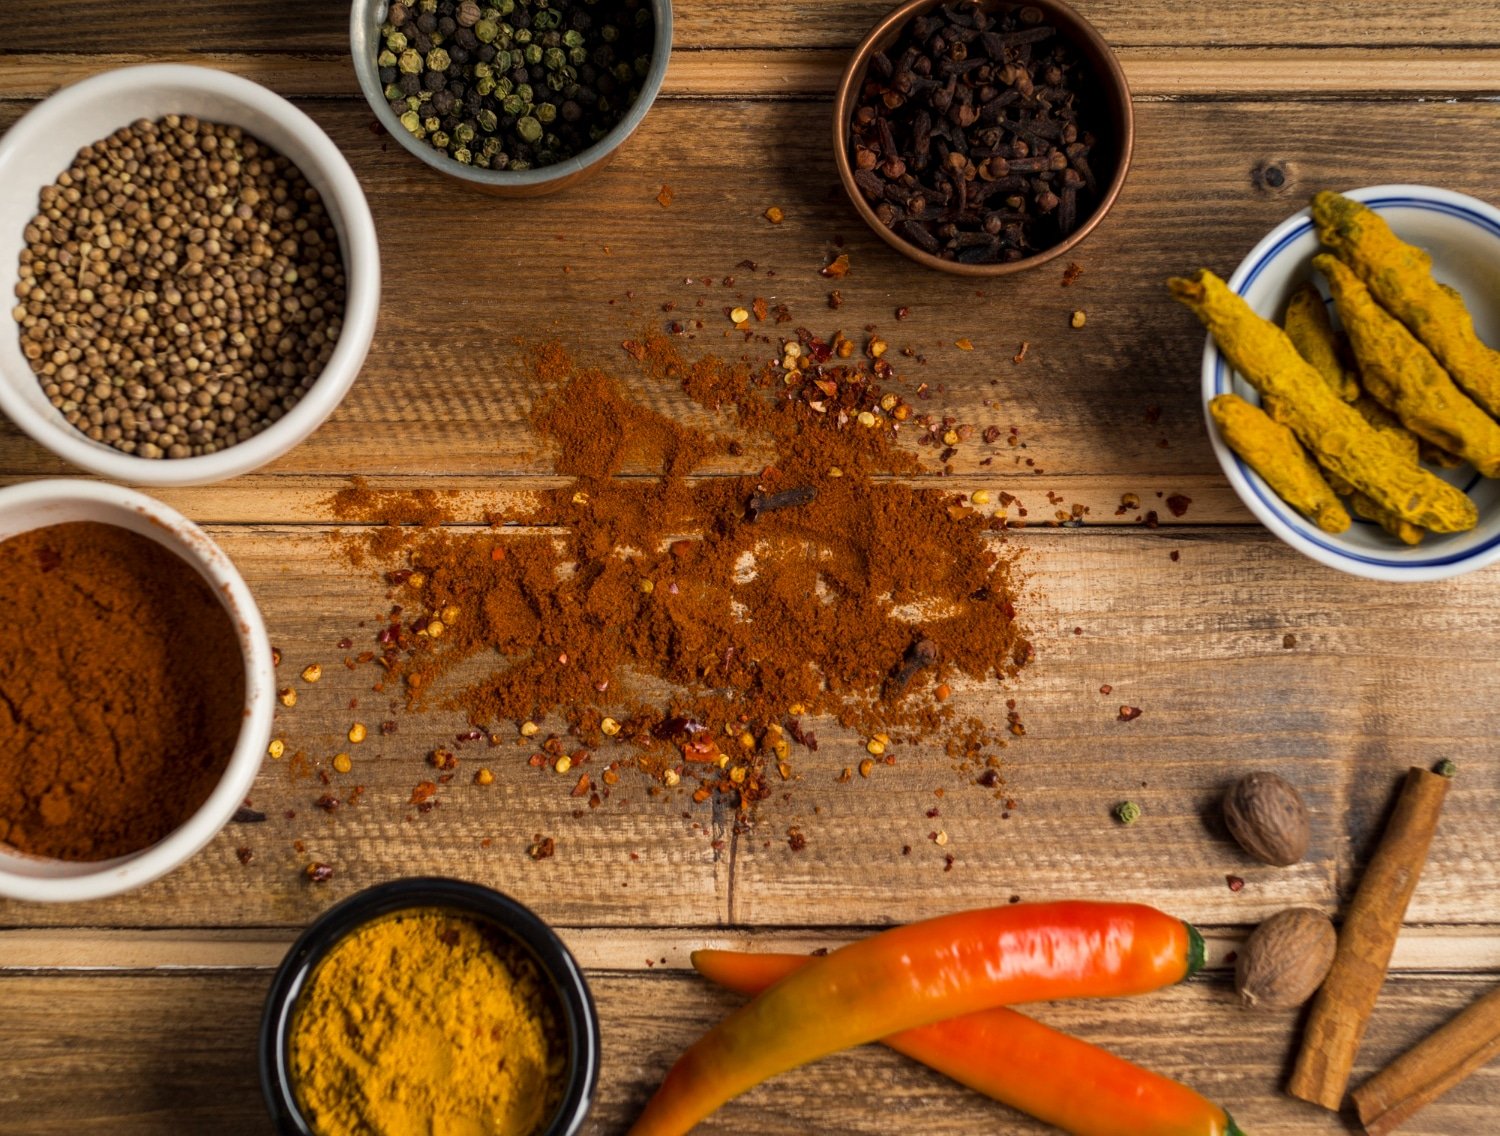 Spice Up Your Kitchen With De Kruidenbaron NL & BE’s Exotic Herbs And Spices